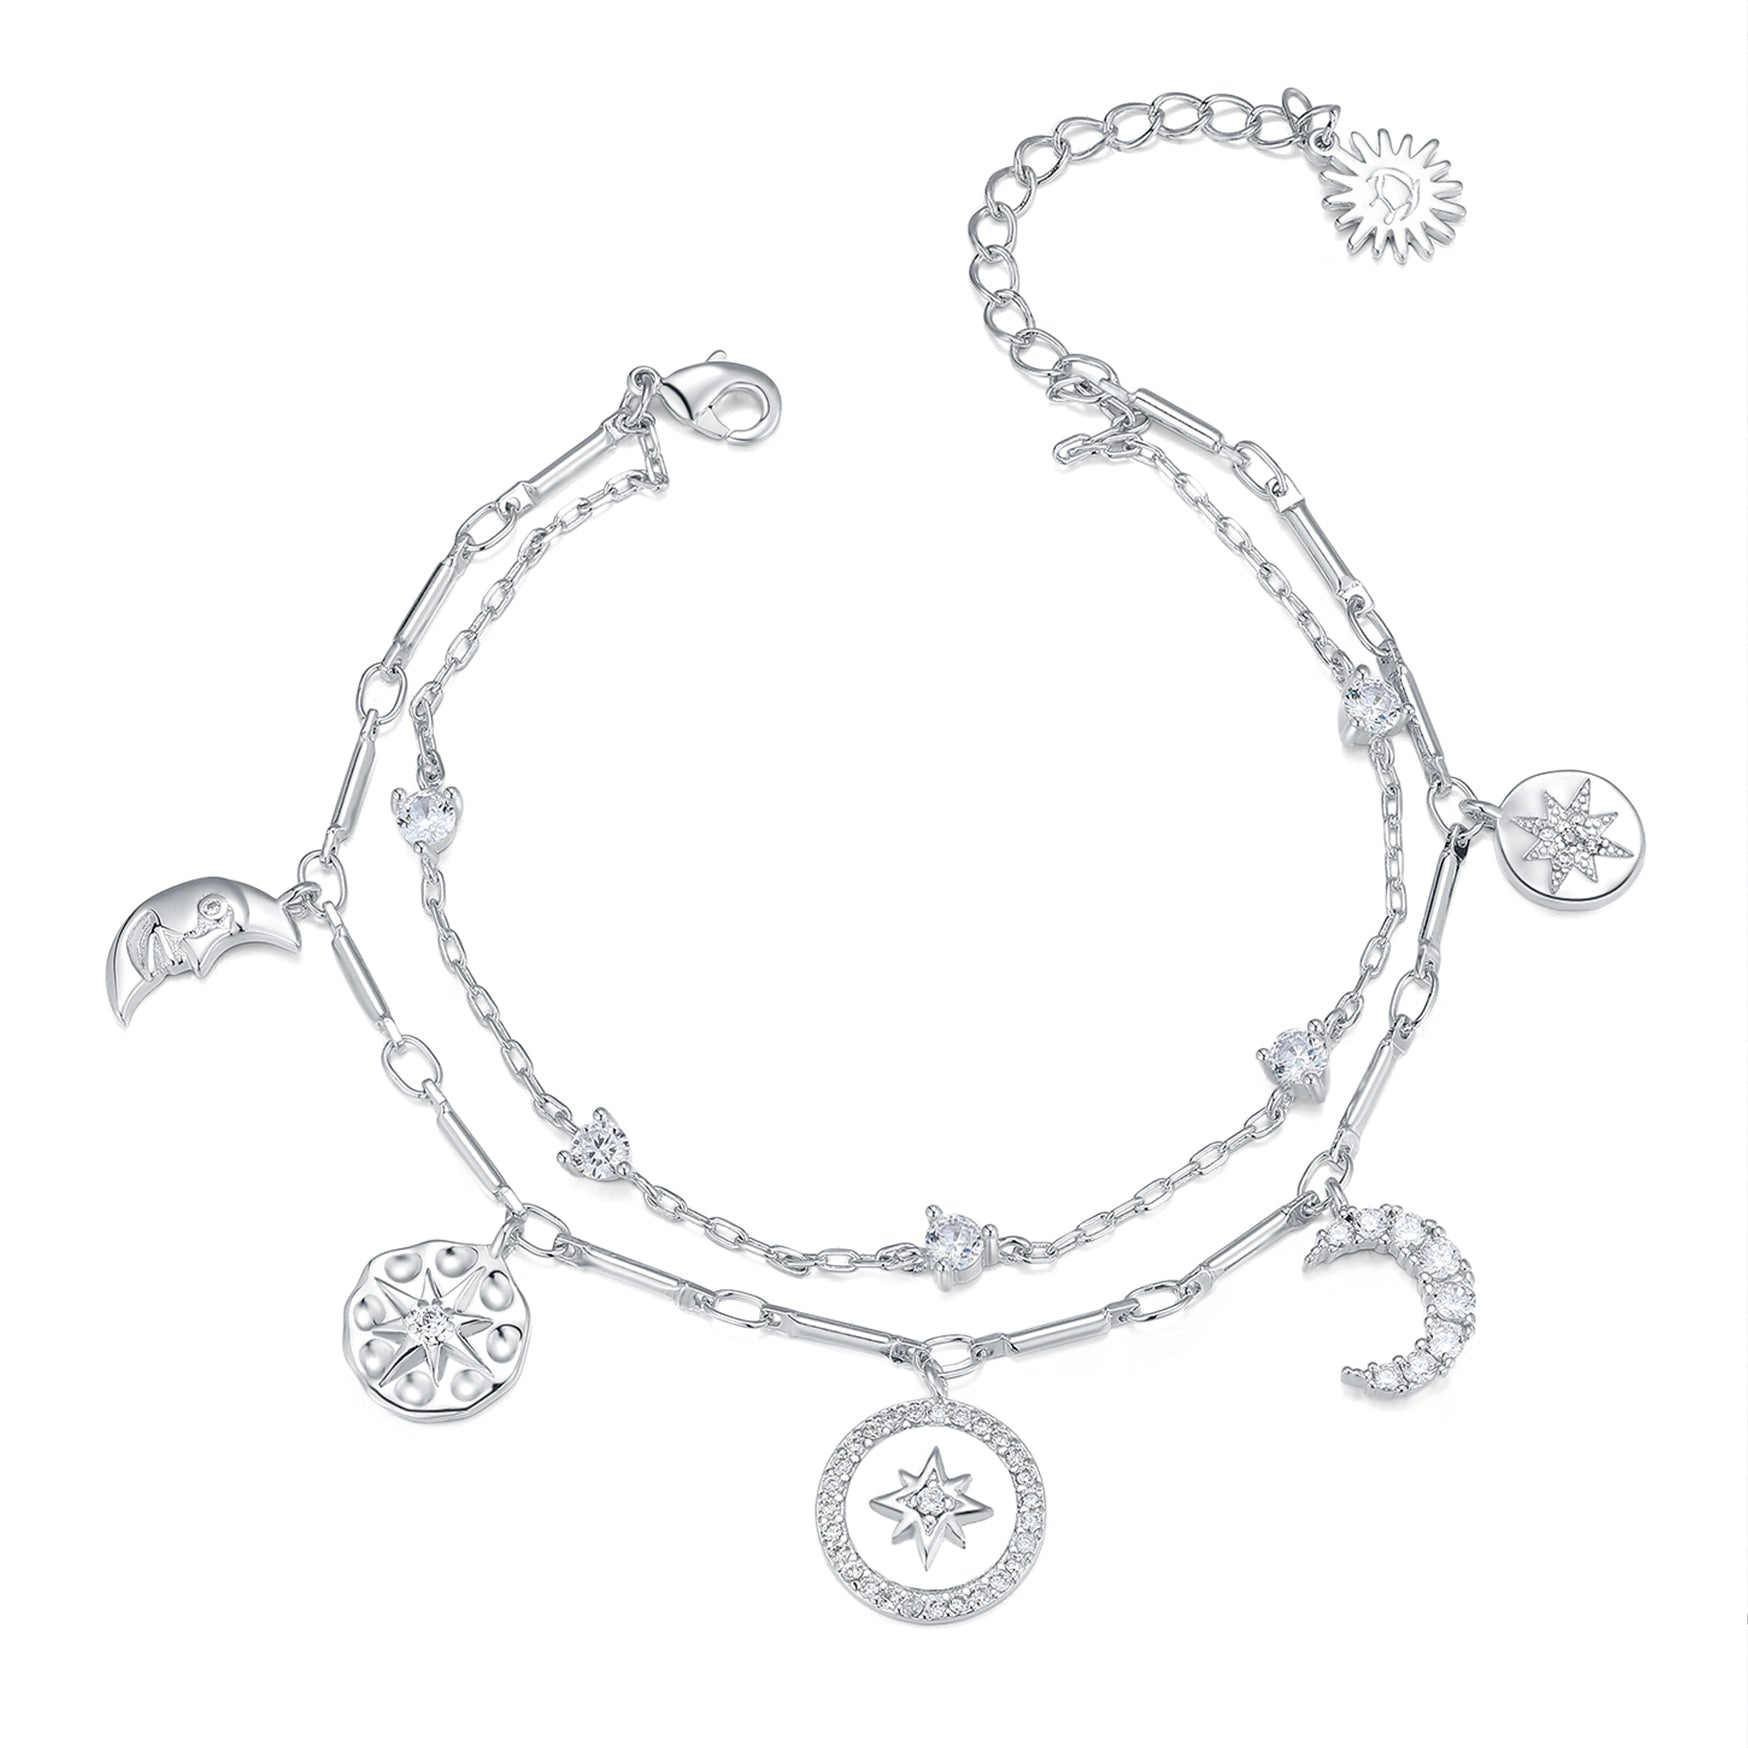 Silver Layered Bracelet - Love By the Moon